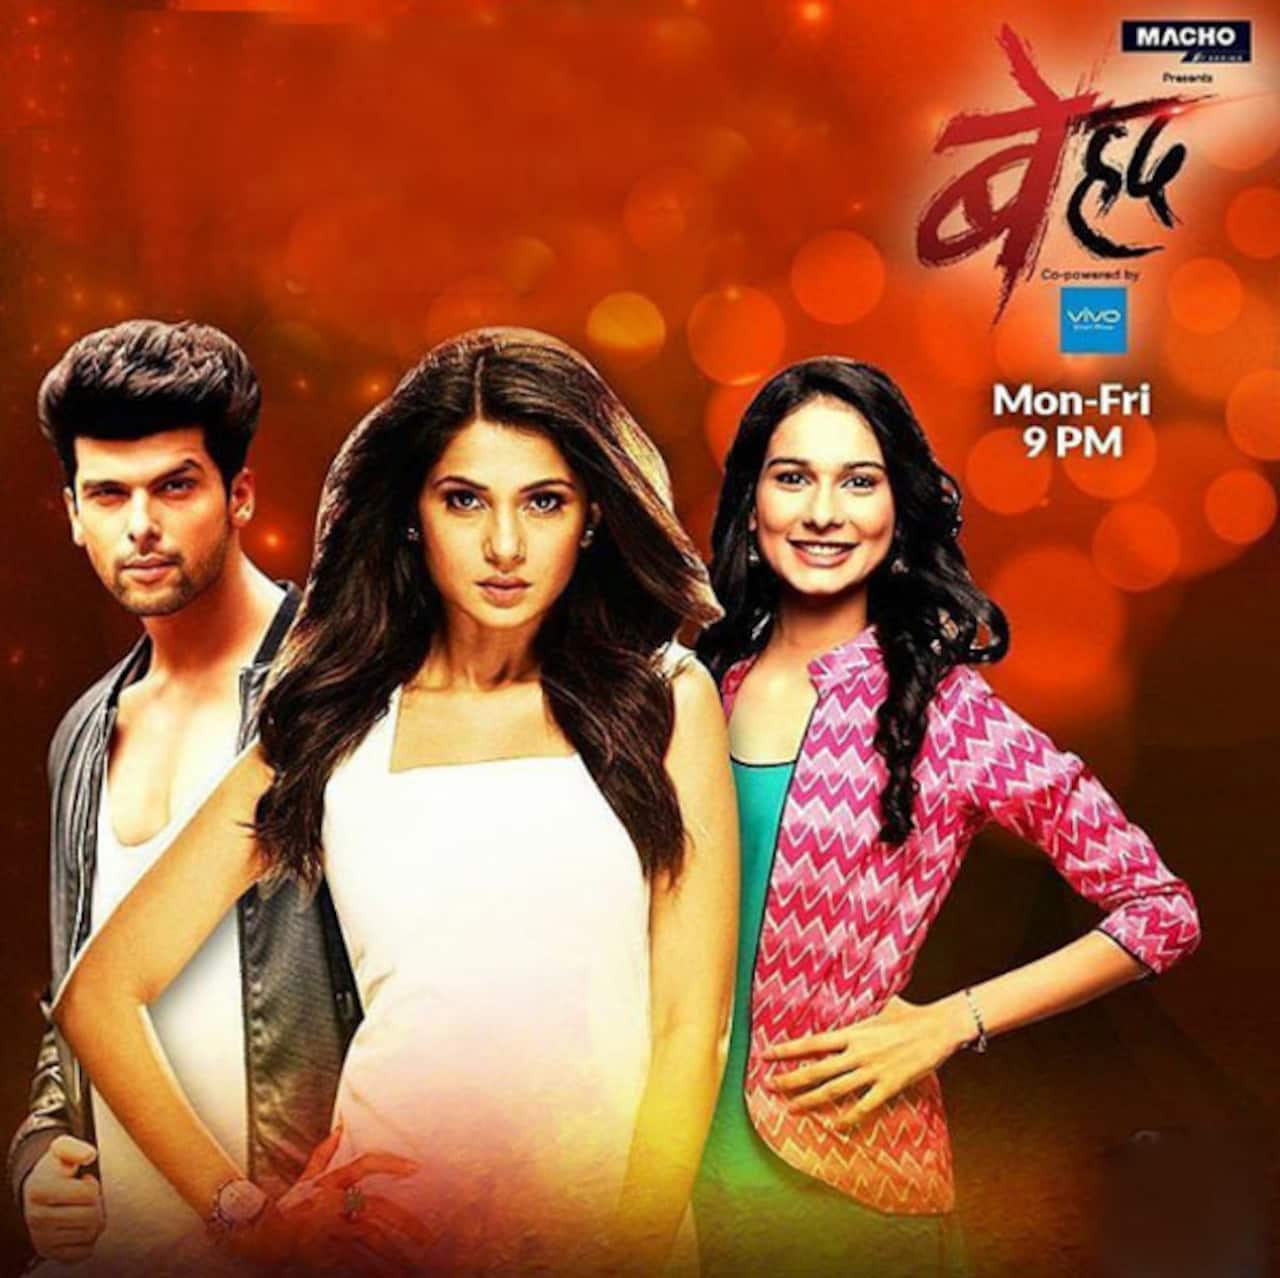 Beyhadh new promo: Jennifer Winget's fierce avatar and Kushal Tandon's cool dude look is engrossing!